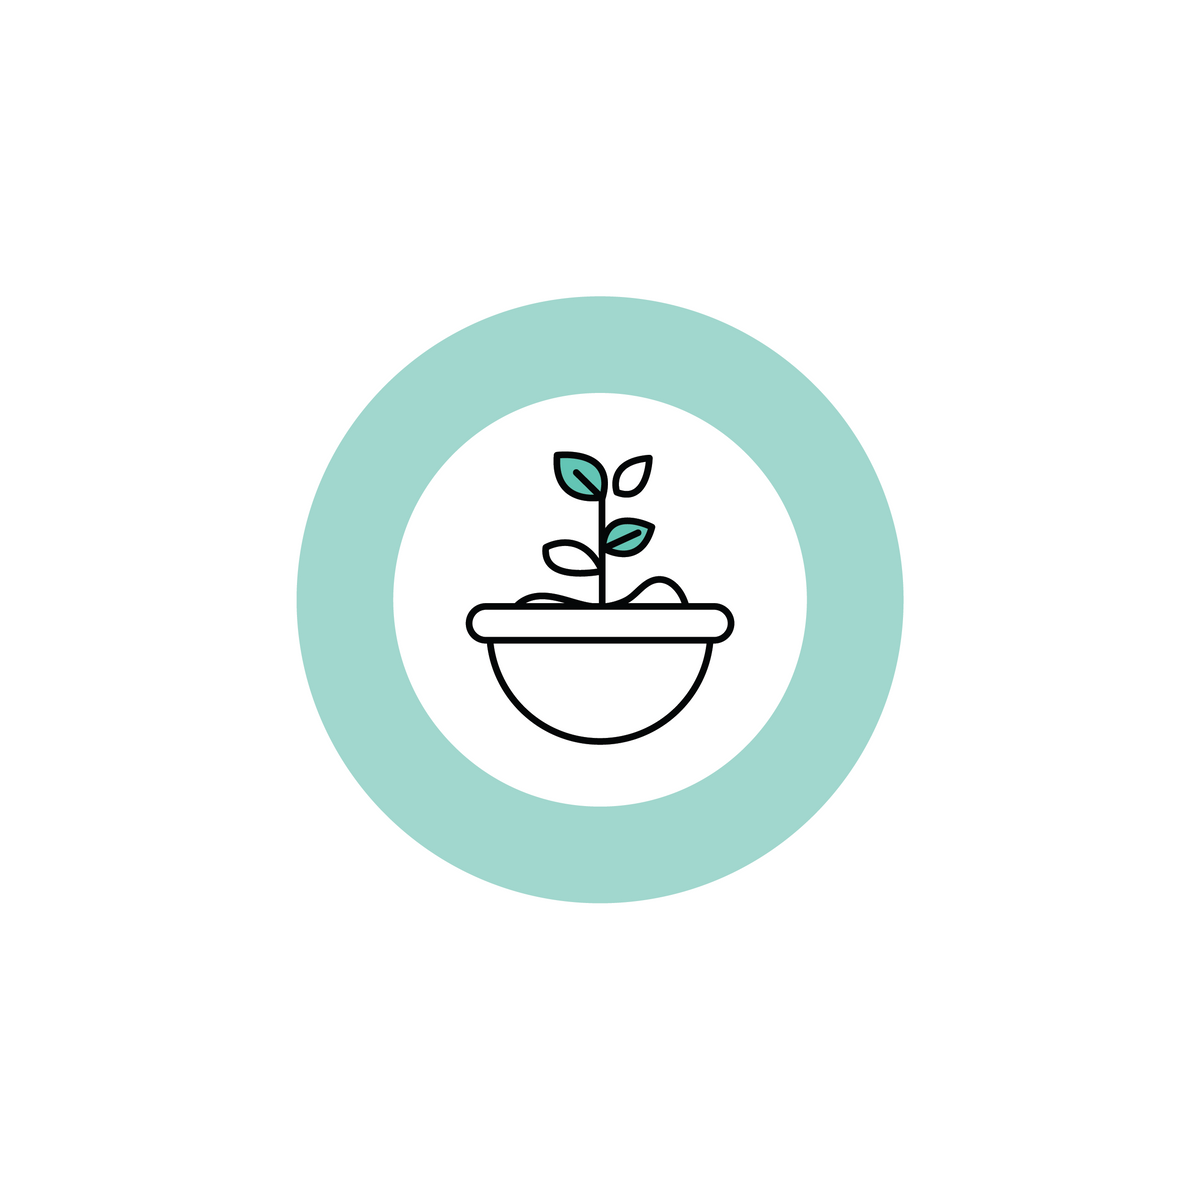 simple icon of a small plant in a round pot